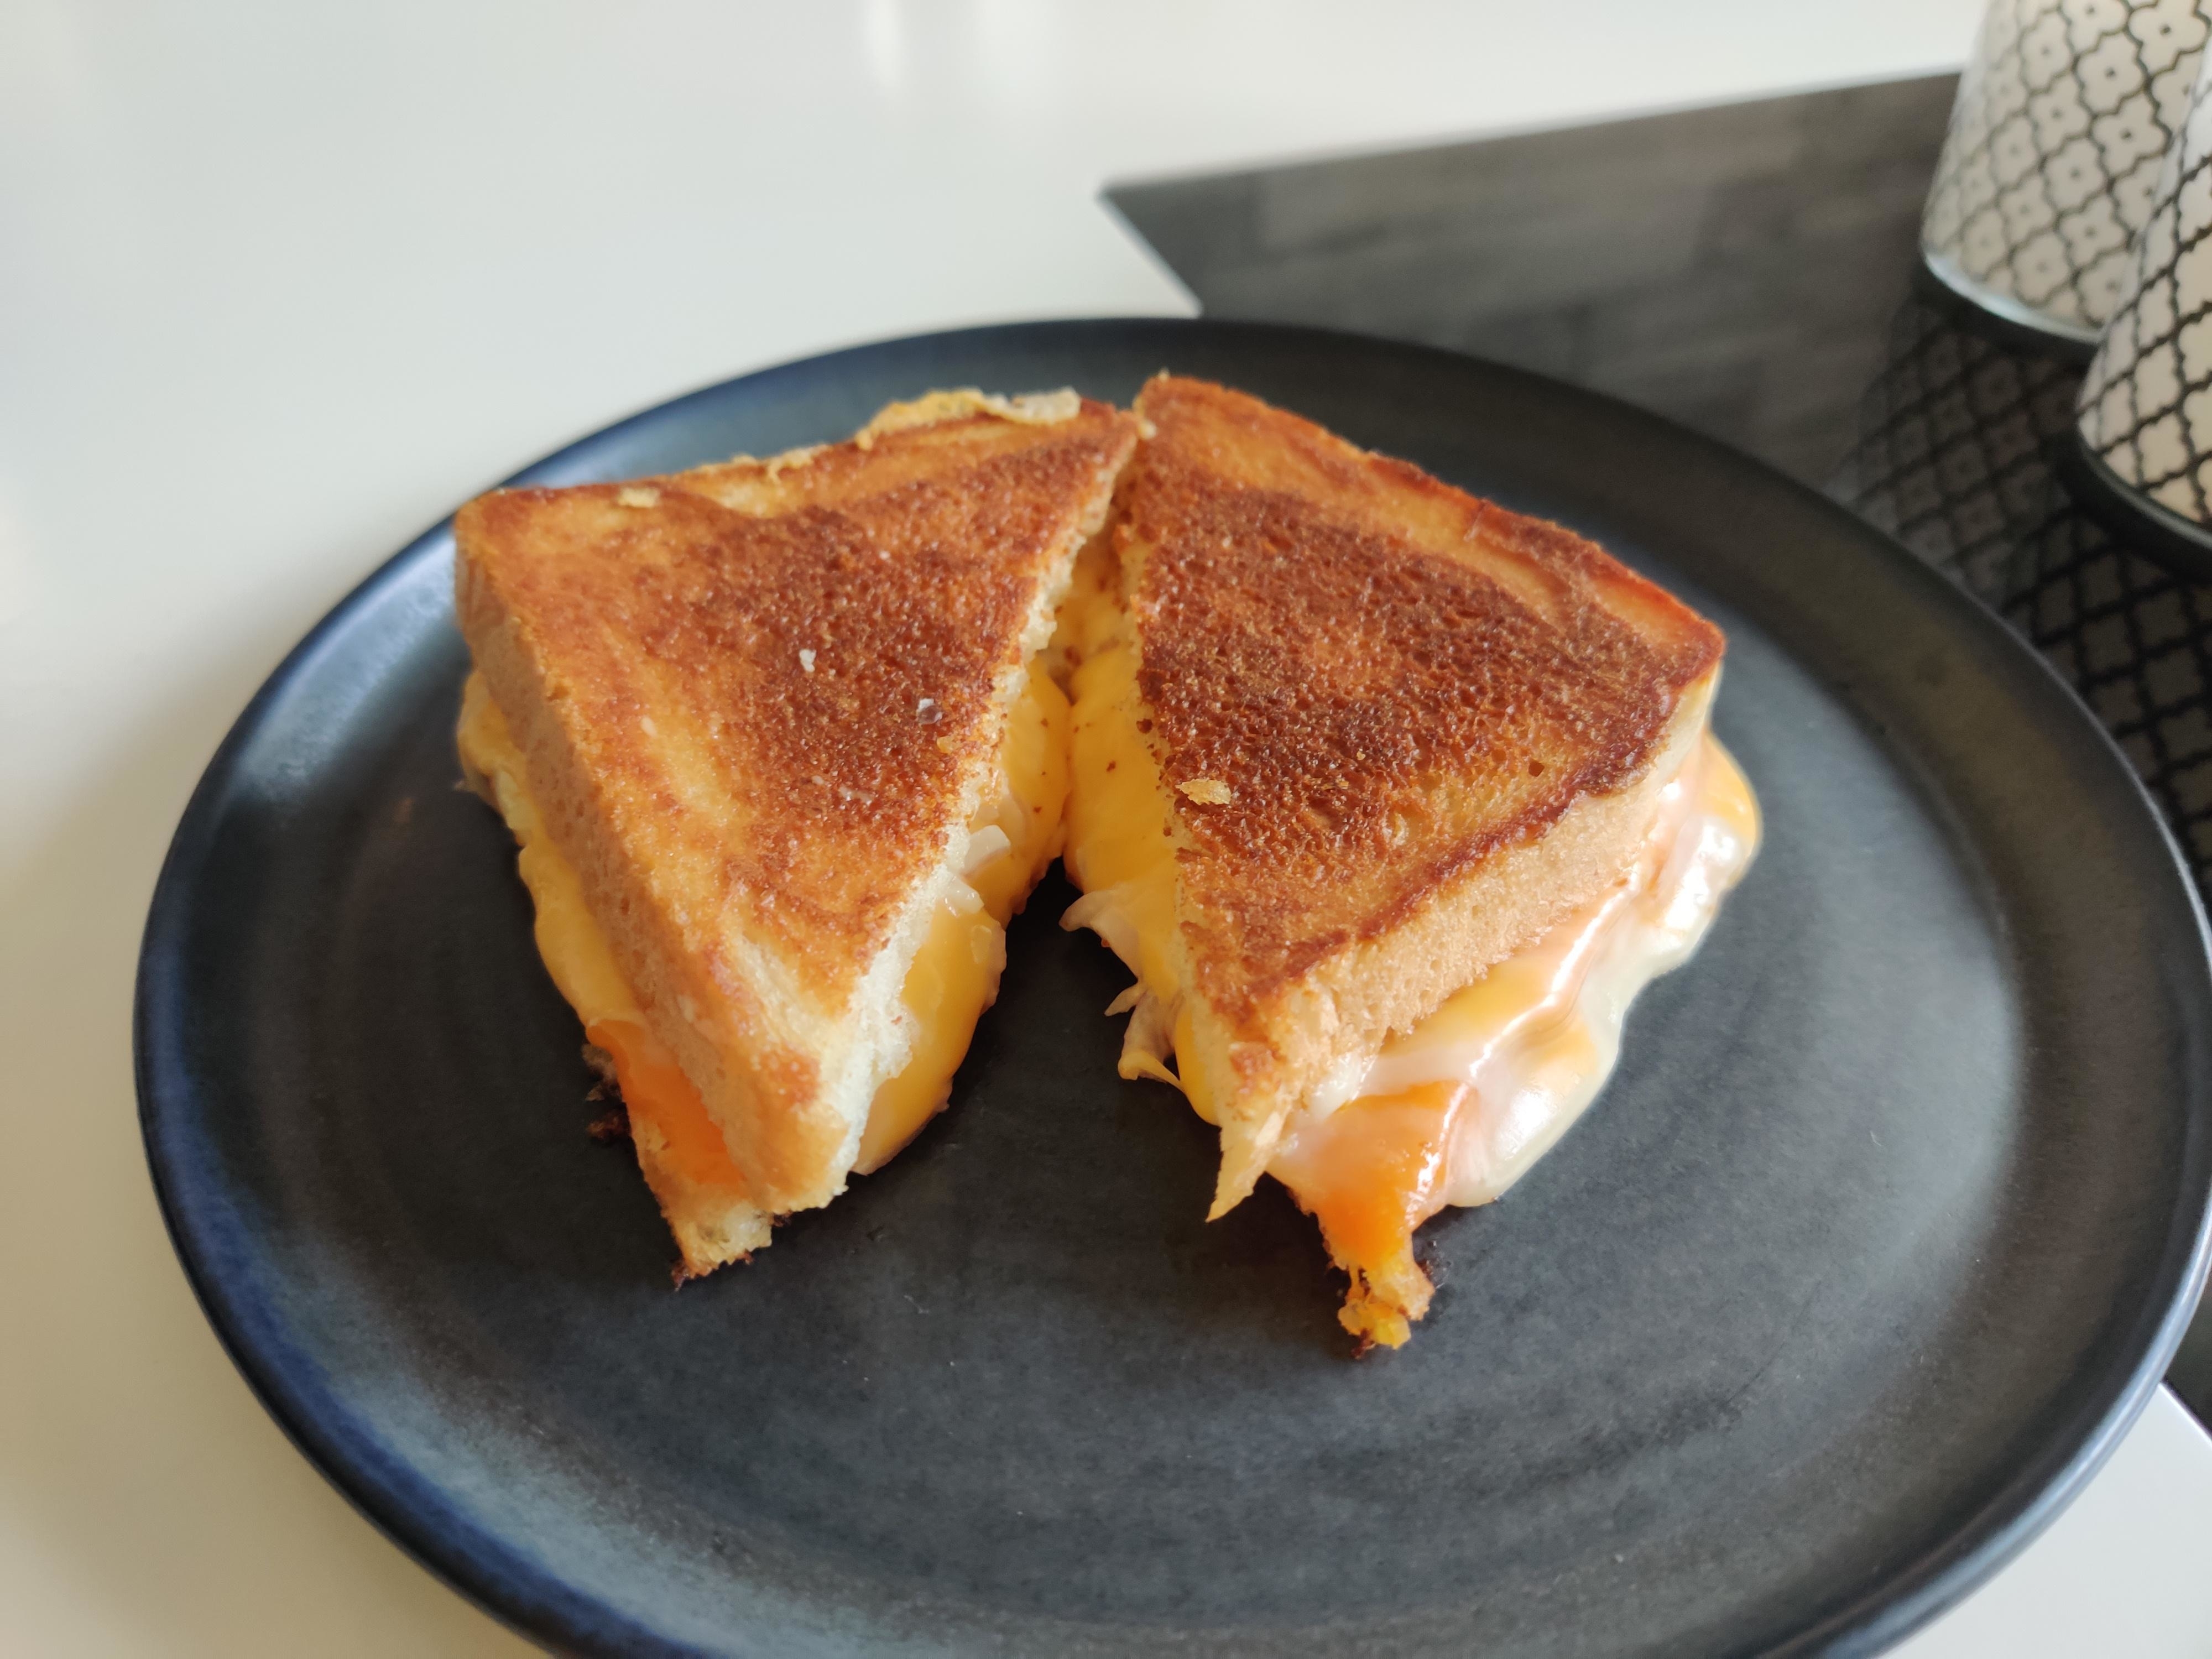 A grilled cheese sandwich on a plate